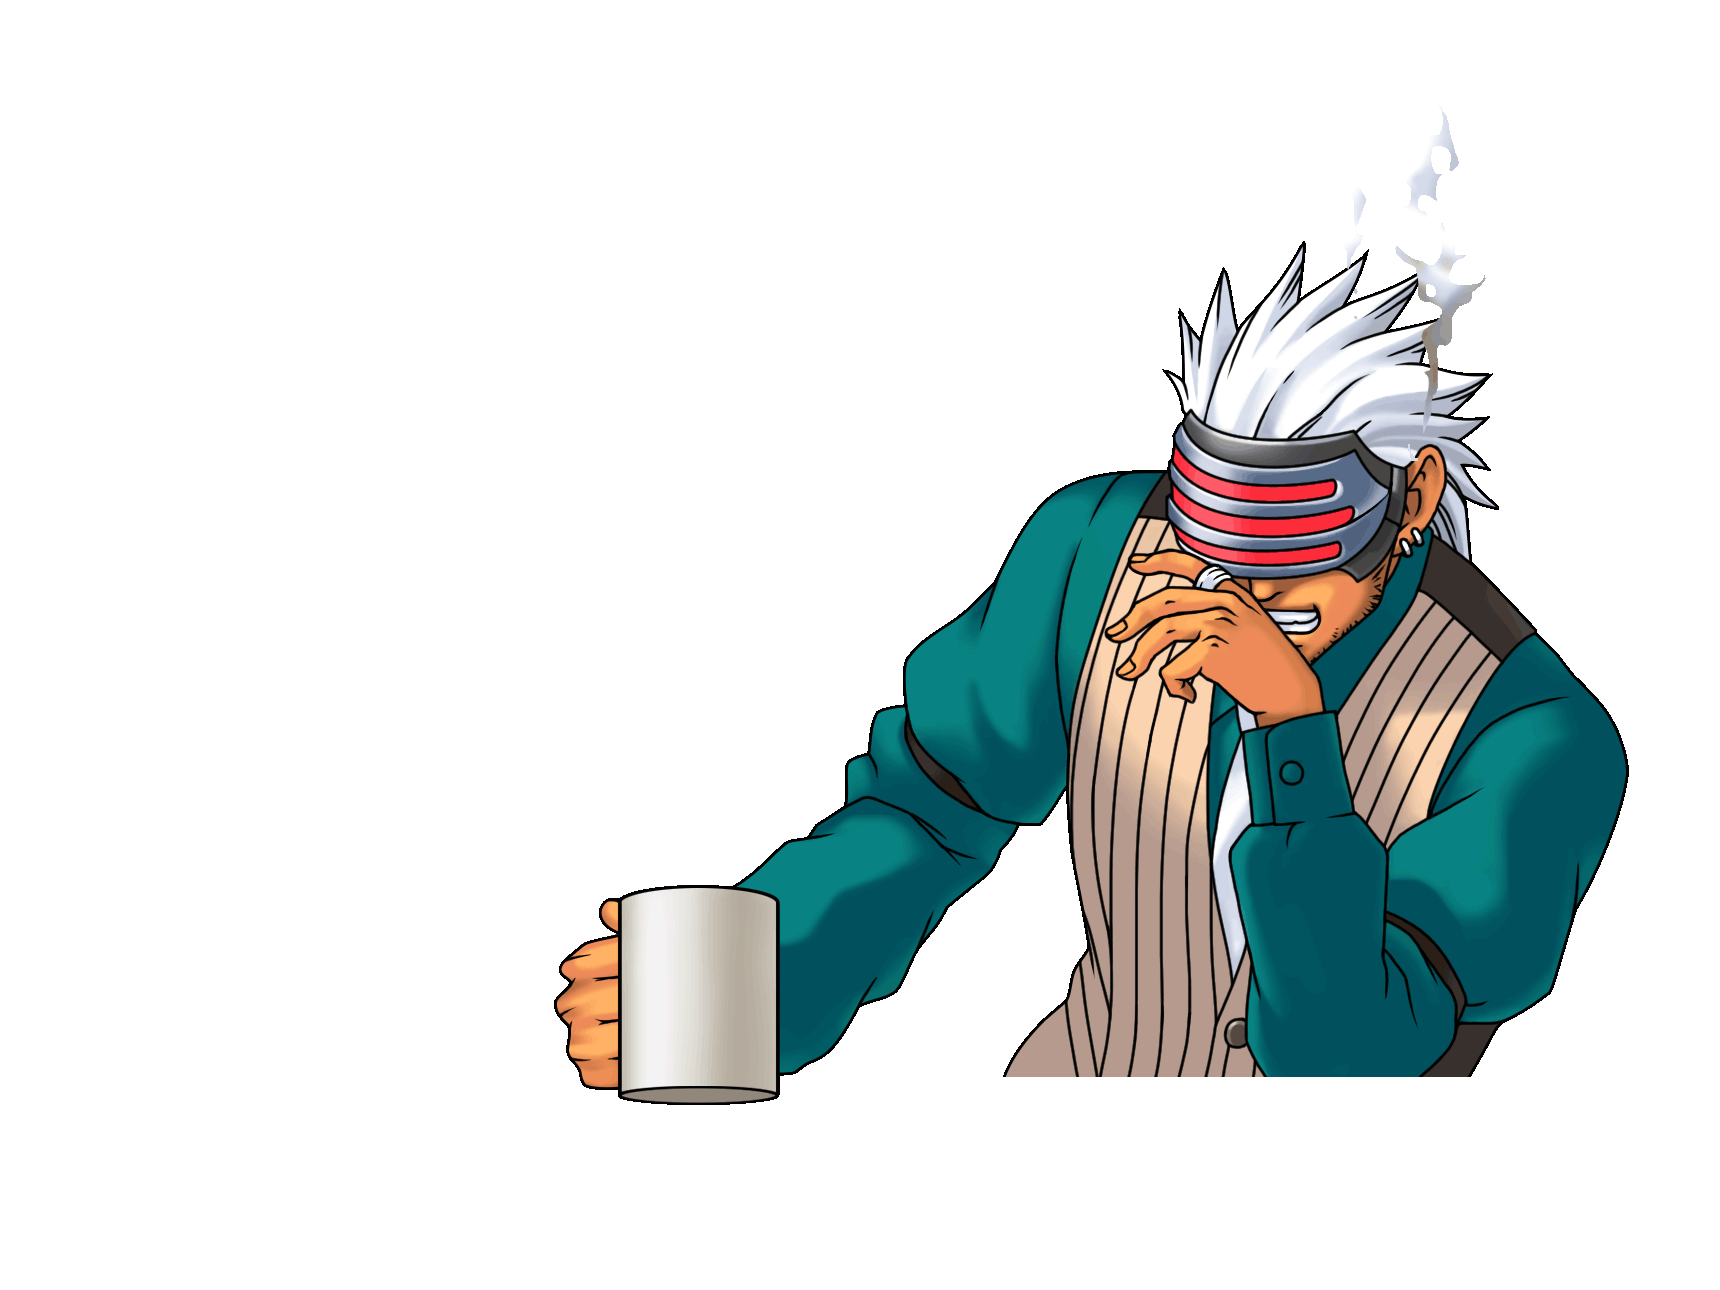 https://static.wikia.nocookie.net/aceattorney/images/8/8a/Godot_HD_Visor_steam_with_coffee.gif